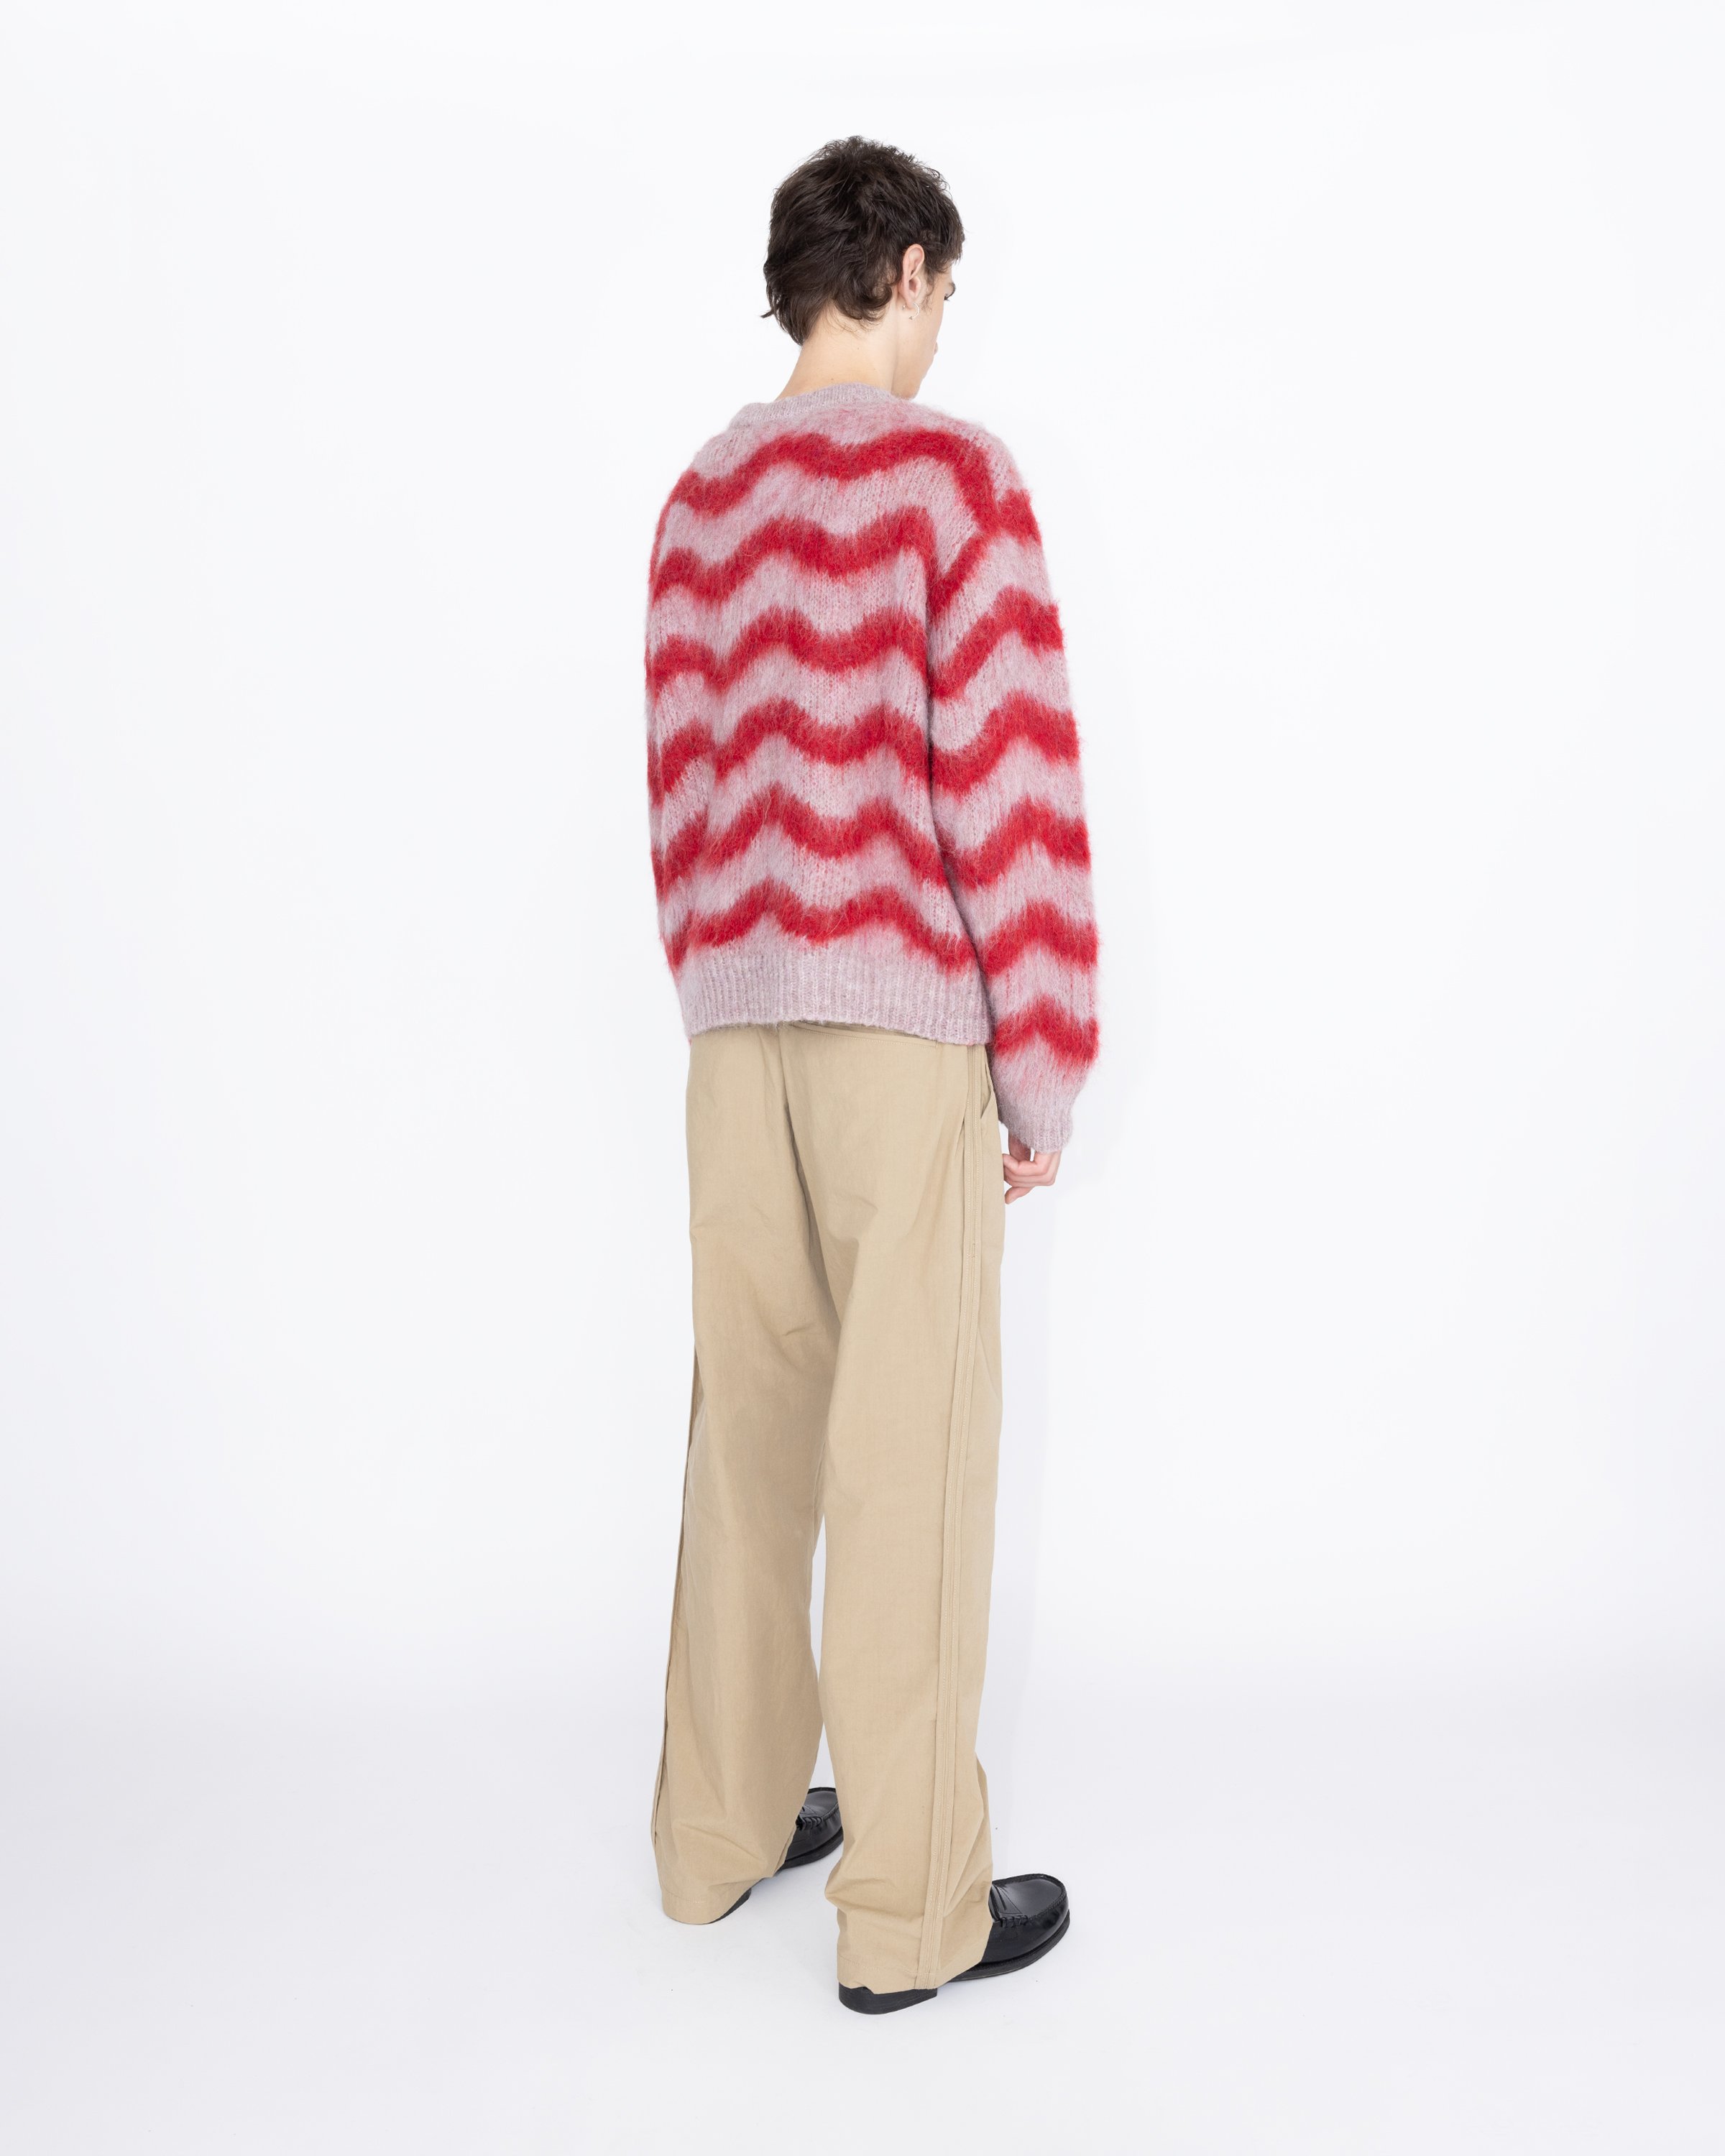 Highsnobiety HS05 - Alpaca Fuzzy Wave Sweater Pale Rose/Red - Clothing - Multi - Image 5